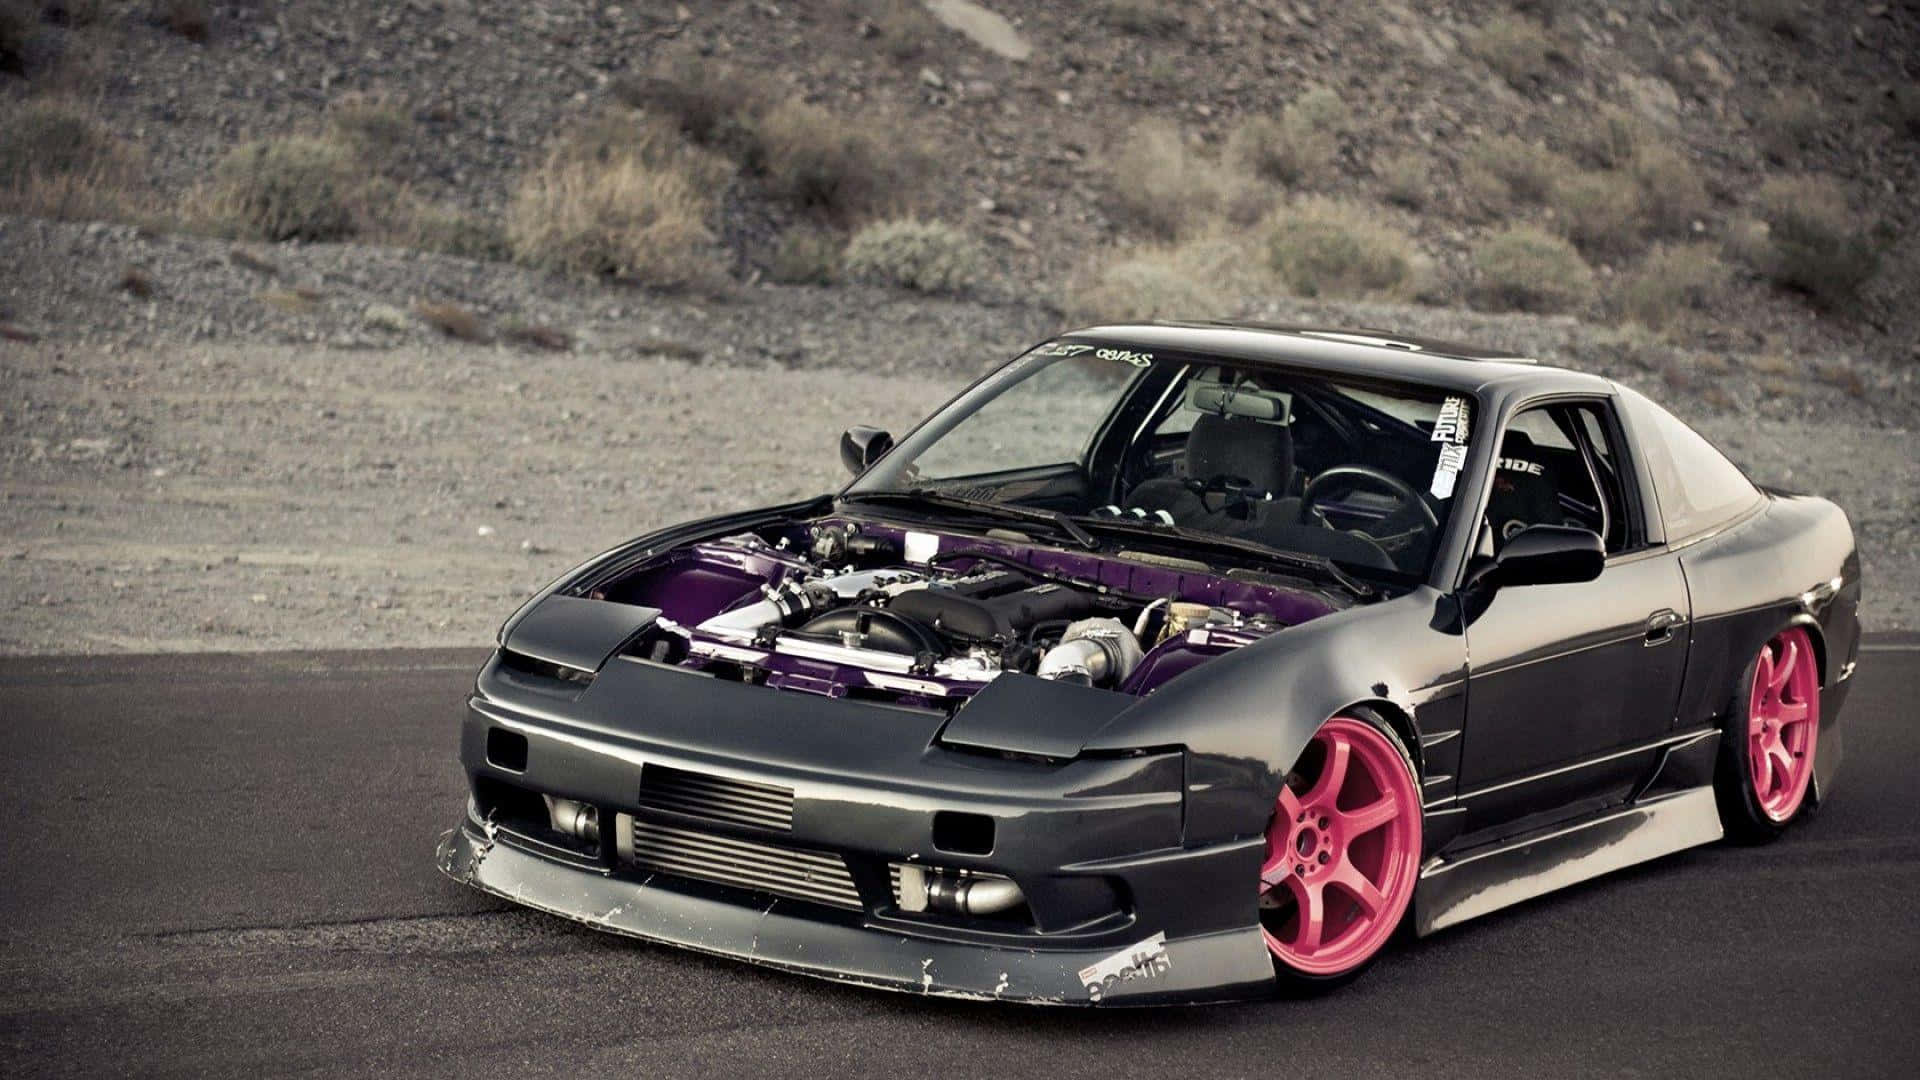 Speed and Style: The Nissan Silvia S13 Wallpaper